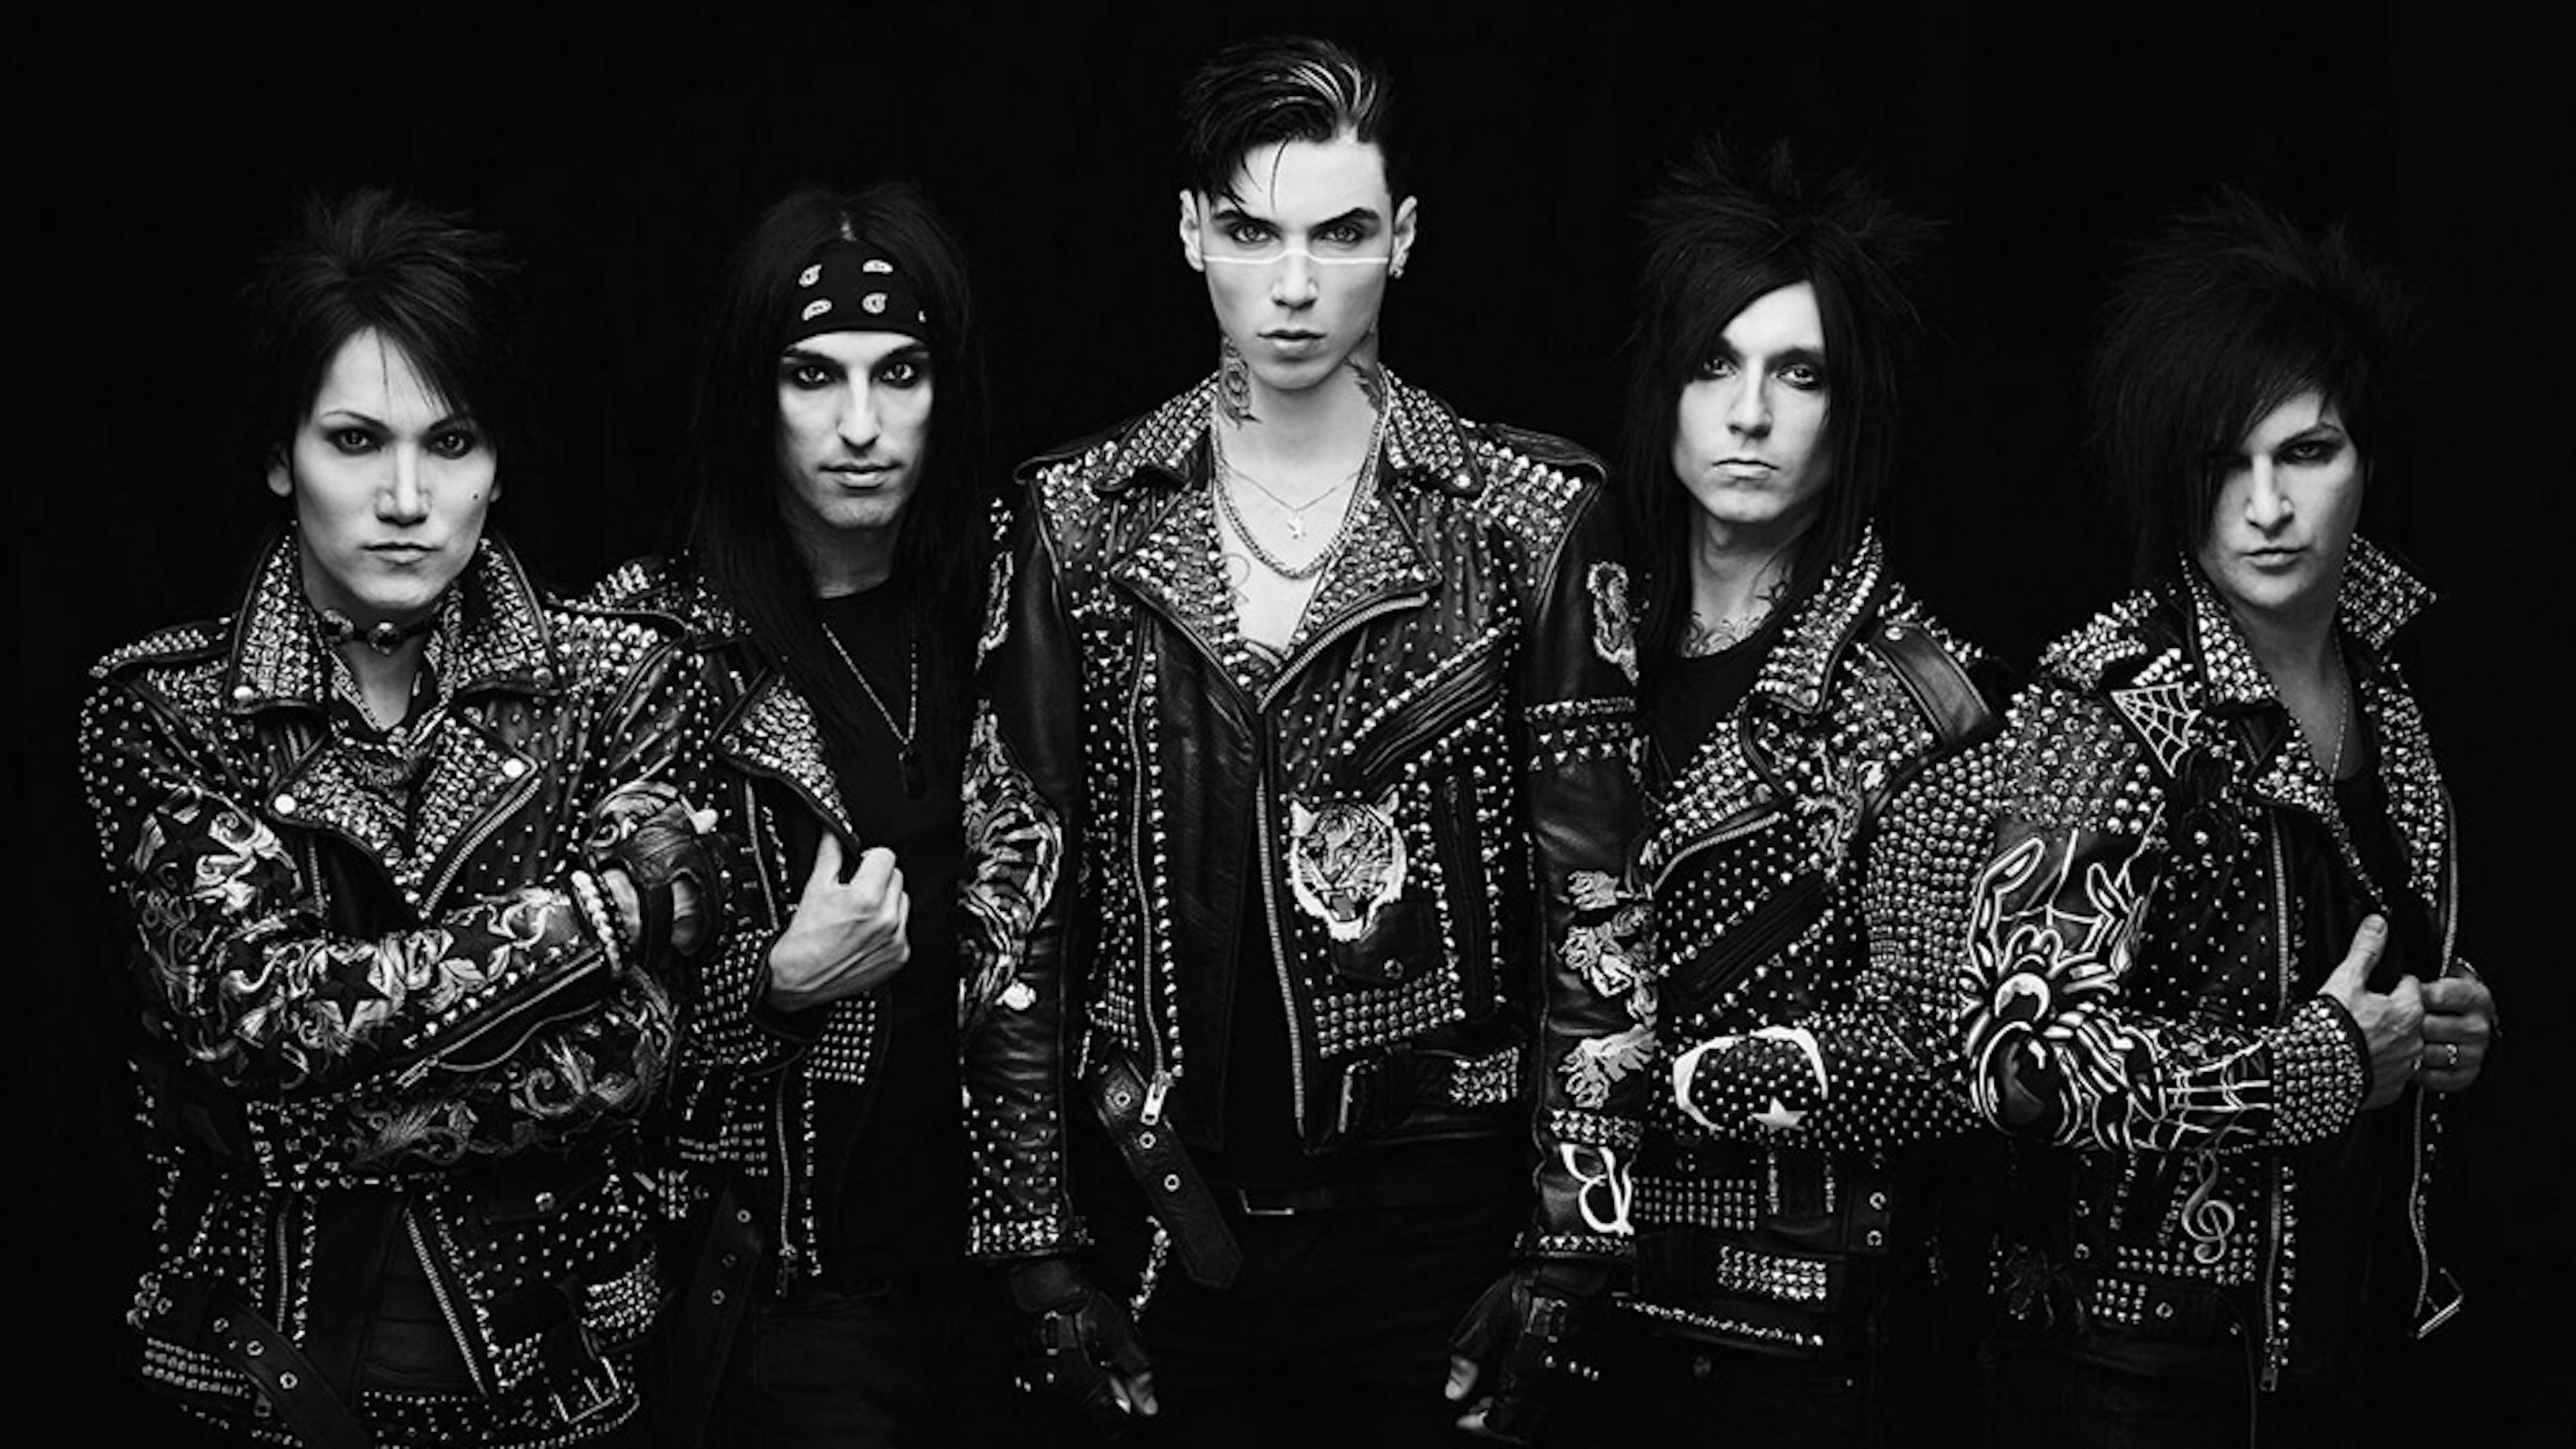 BVB Denied Entry To Vancouver, Forced To Cancel Show